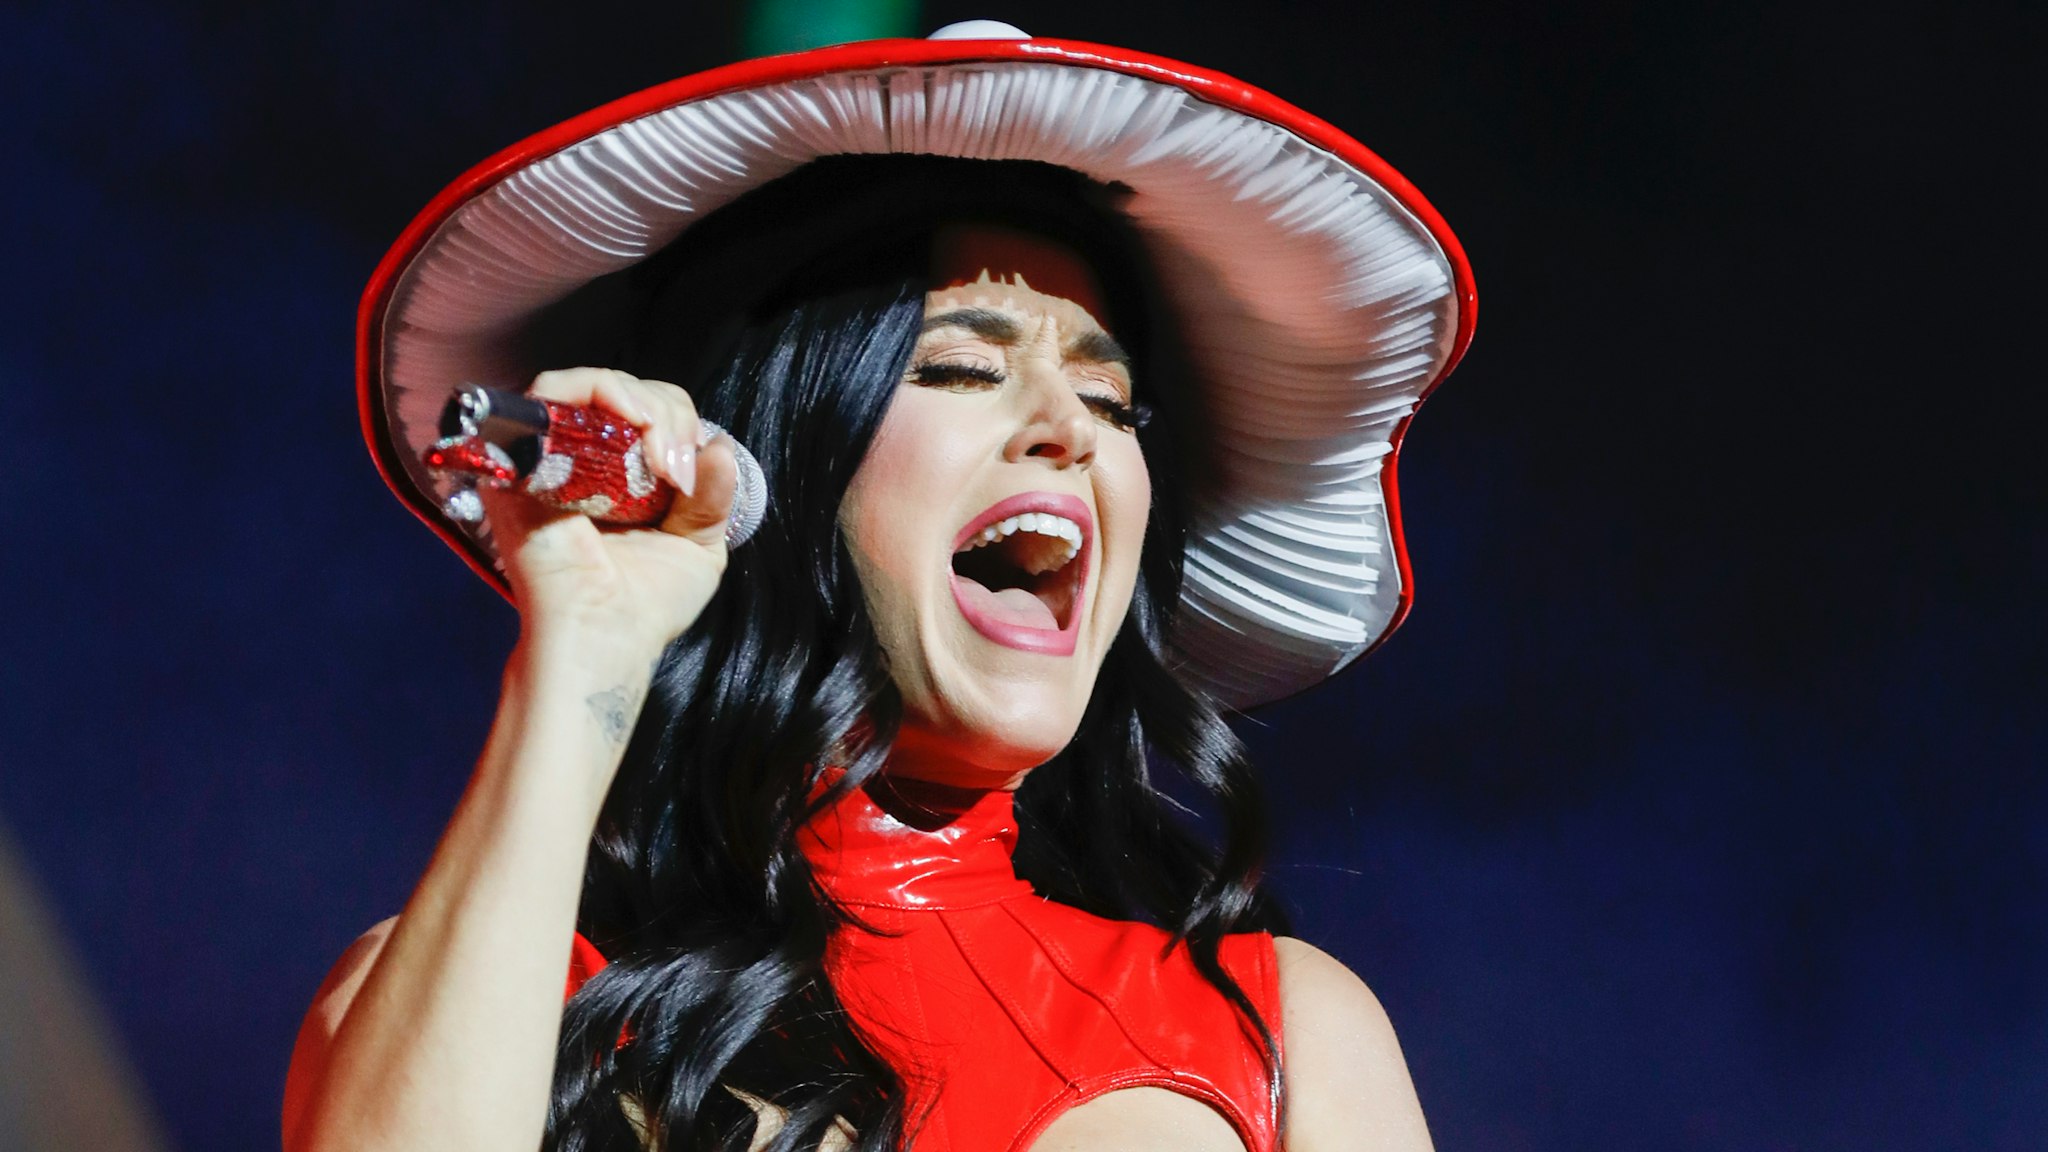 Global Pop Superstar and godmother to Norwegian Prima, Katy Perry, performs at the ship’s christening ceremony in Reykjavik, Iceland to commemorate her first voyage on August 27, 2022.